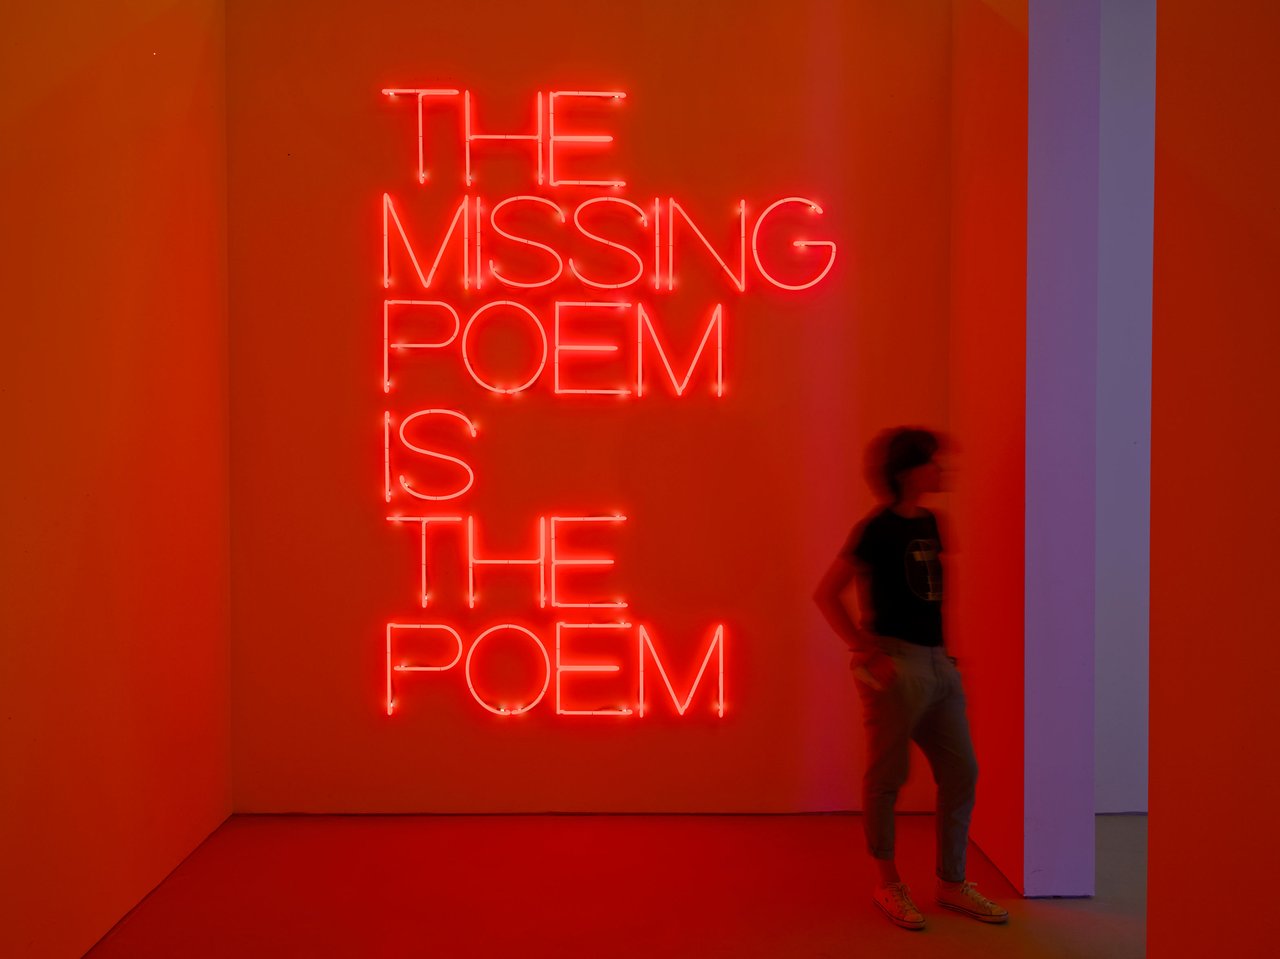 Maurizio Nannucci The missing poem is the poem, 1969.jpg